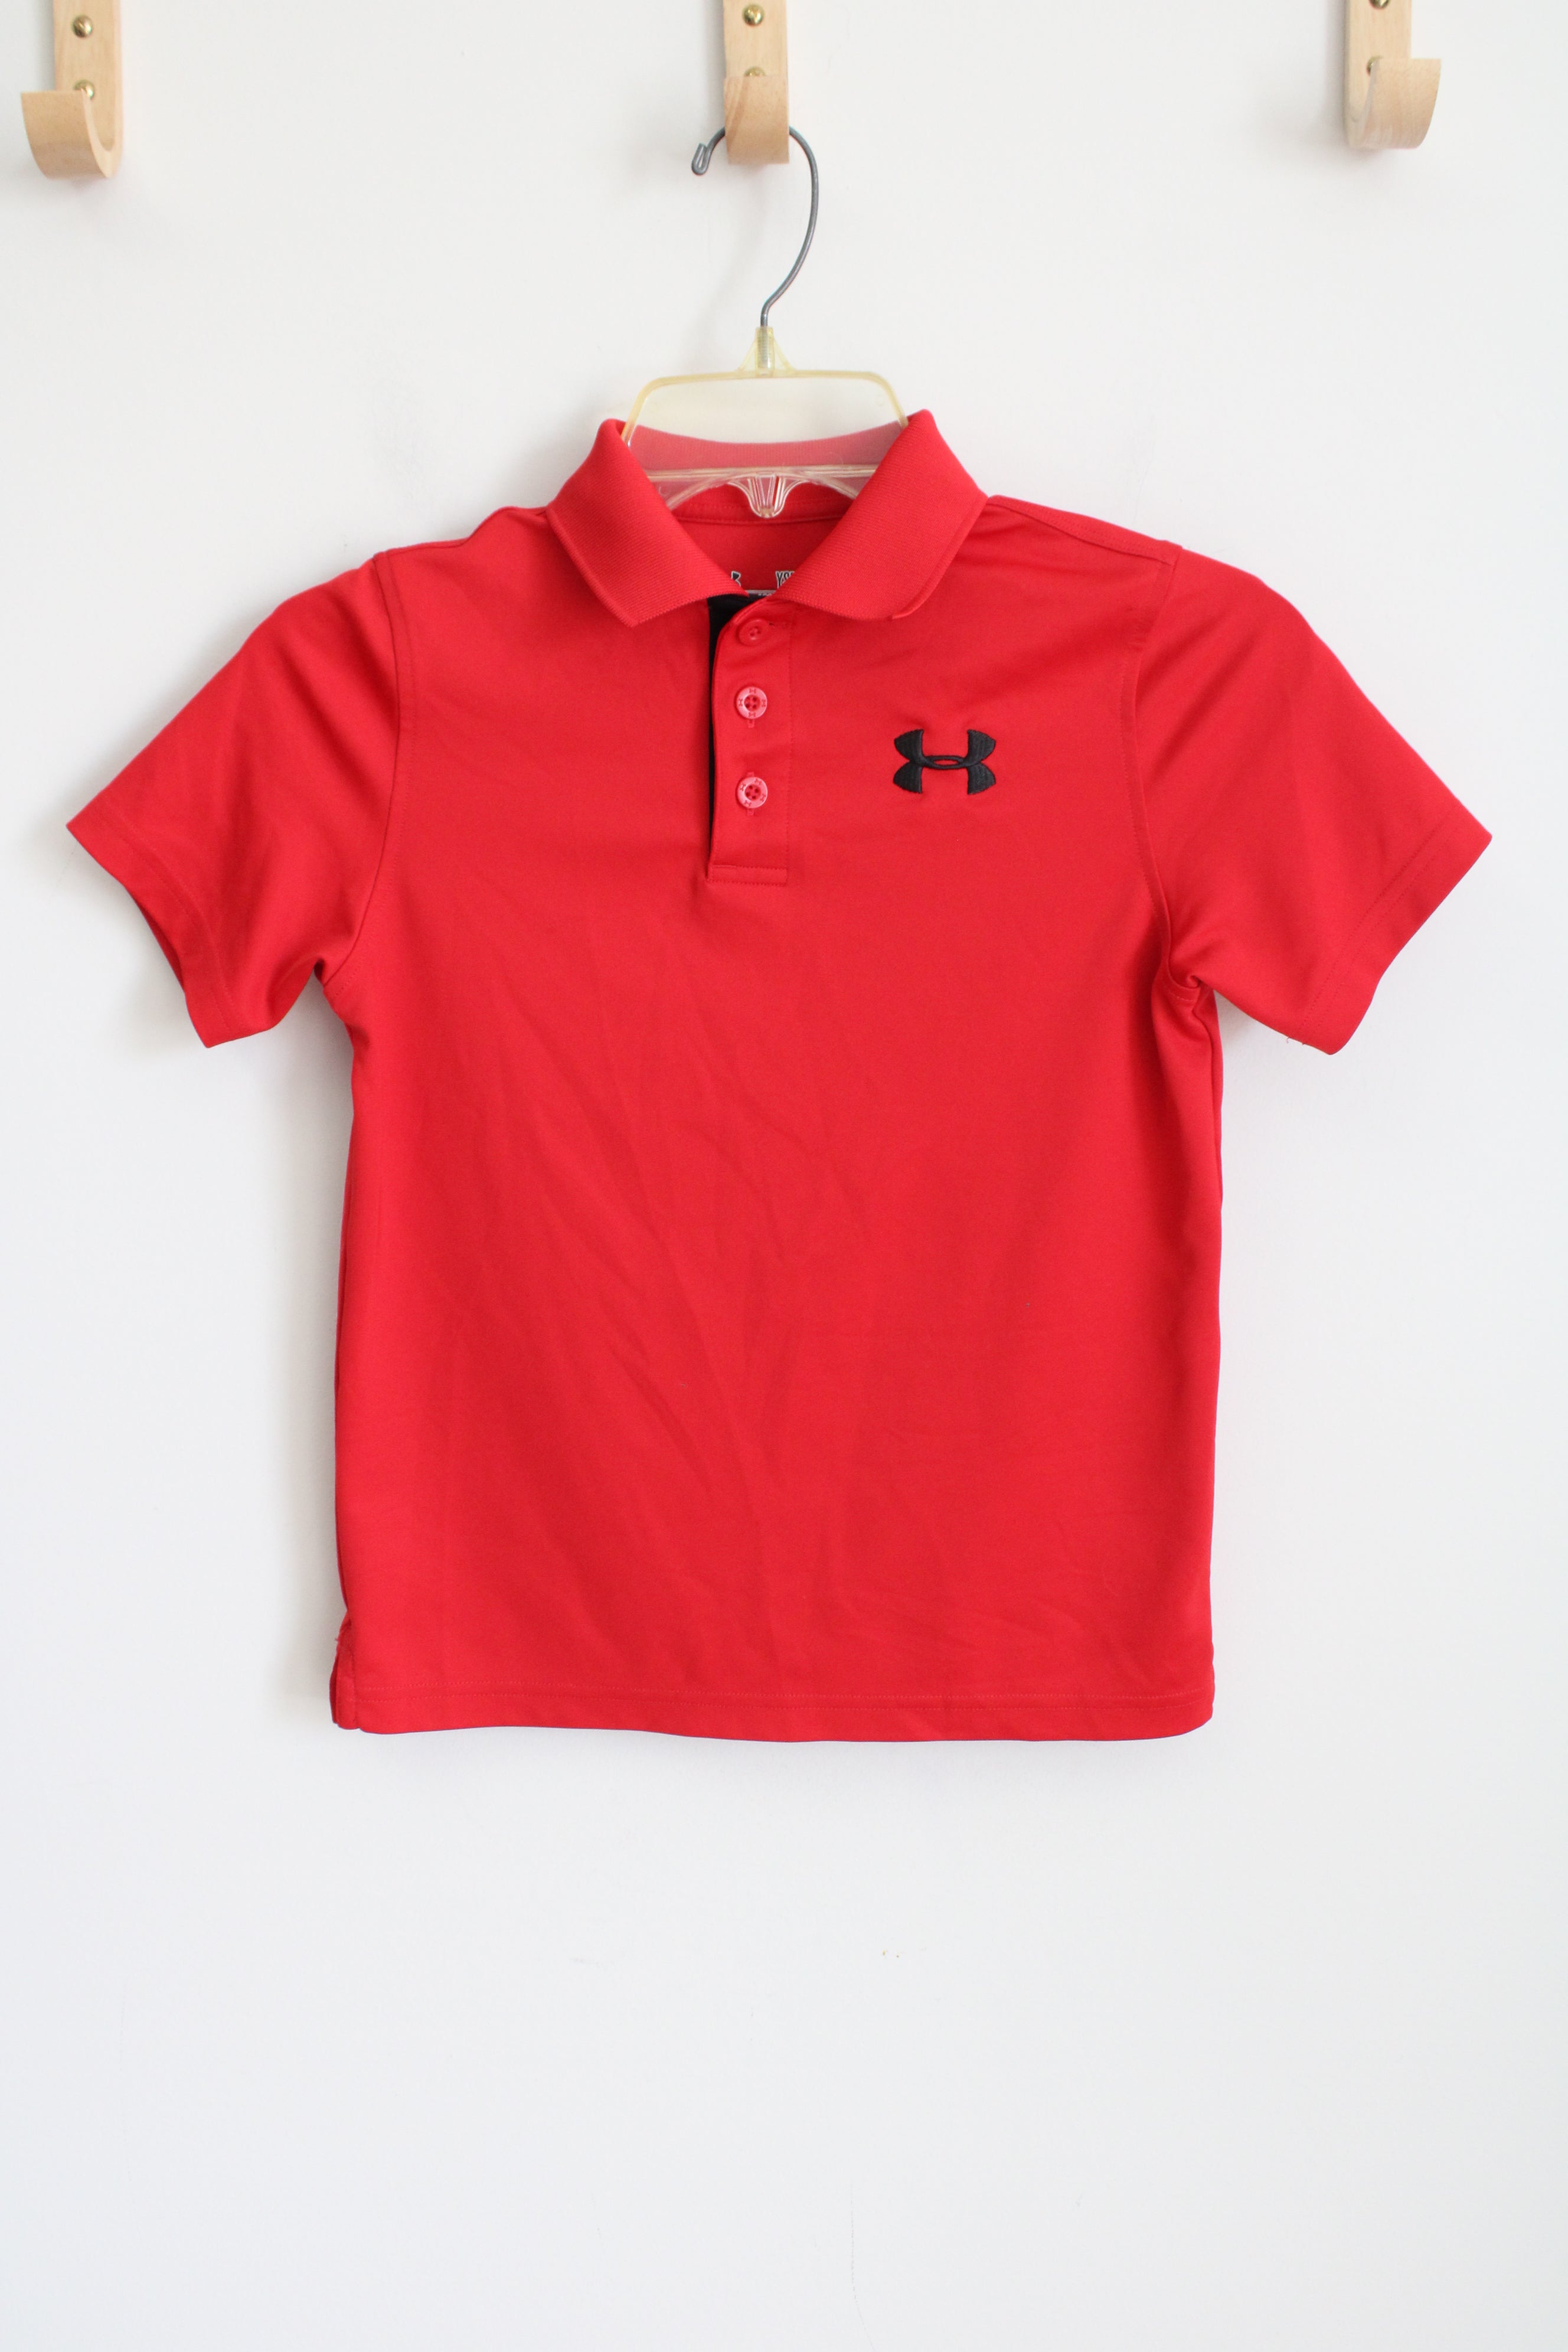 Under Armour Loose Red Polo Shirt | Youth S